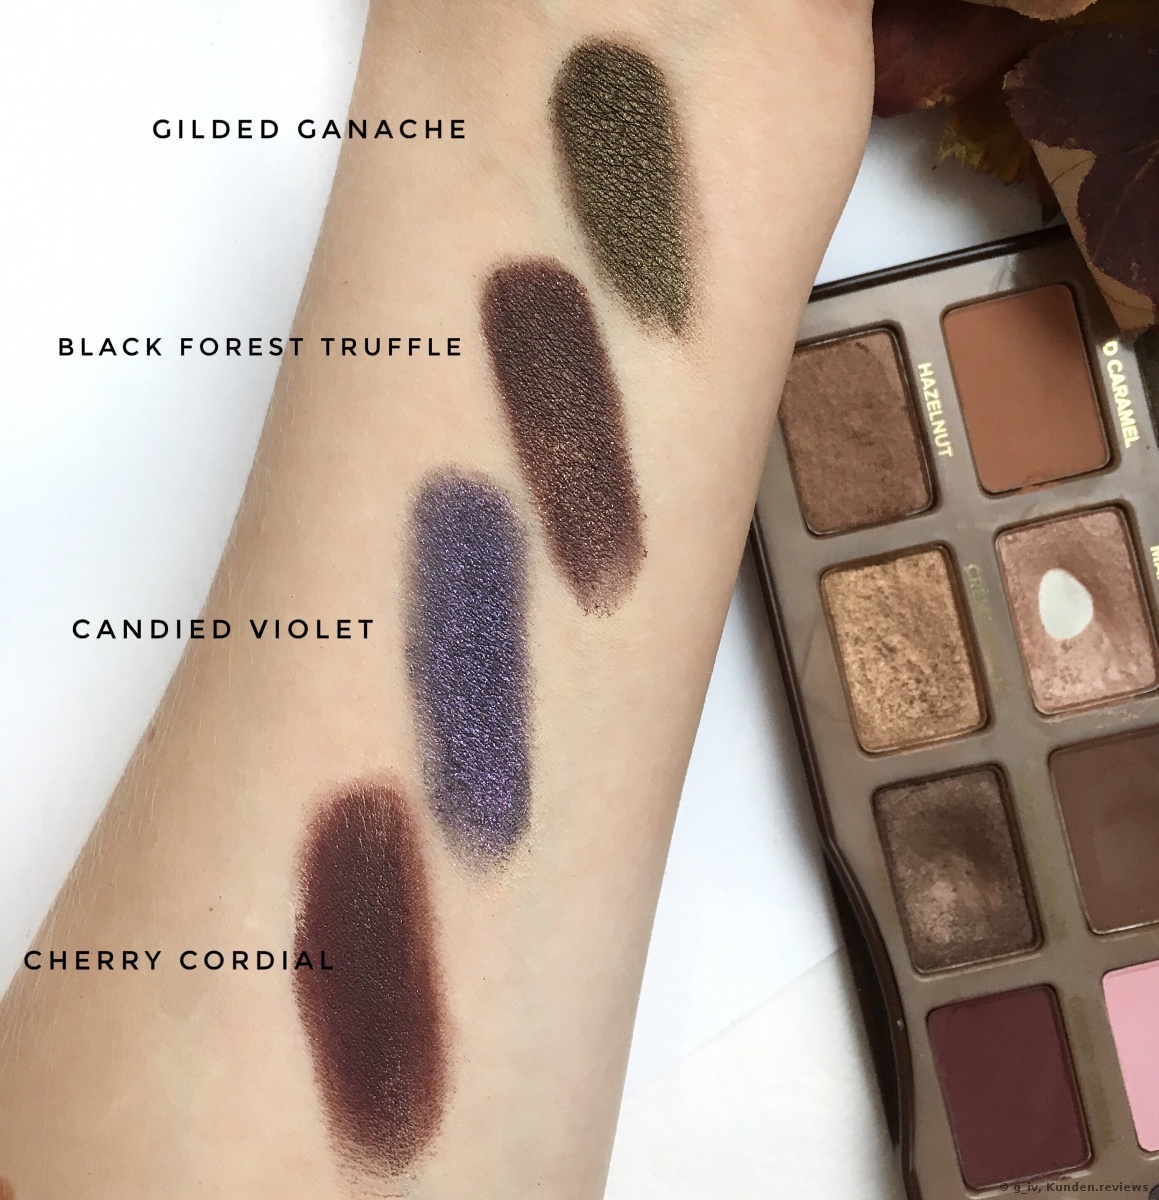  TOO FACED Chocolate Bar Eye Shadow Collection Palette 